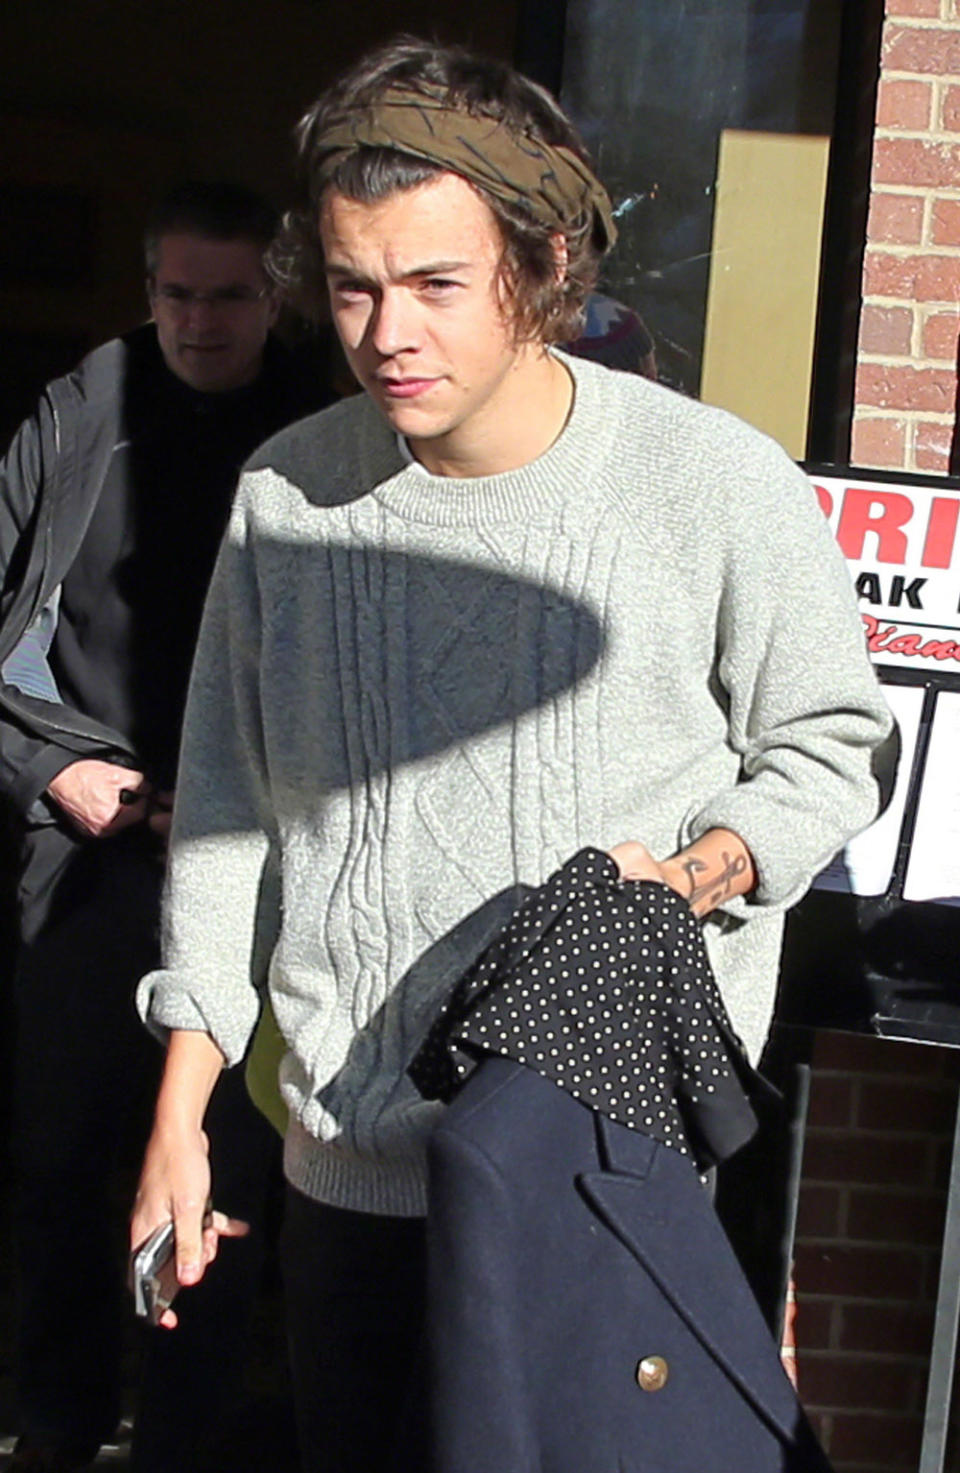 'Are You Hungry?': Harry Styles Offers Food To Paparazzi (WATCH)